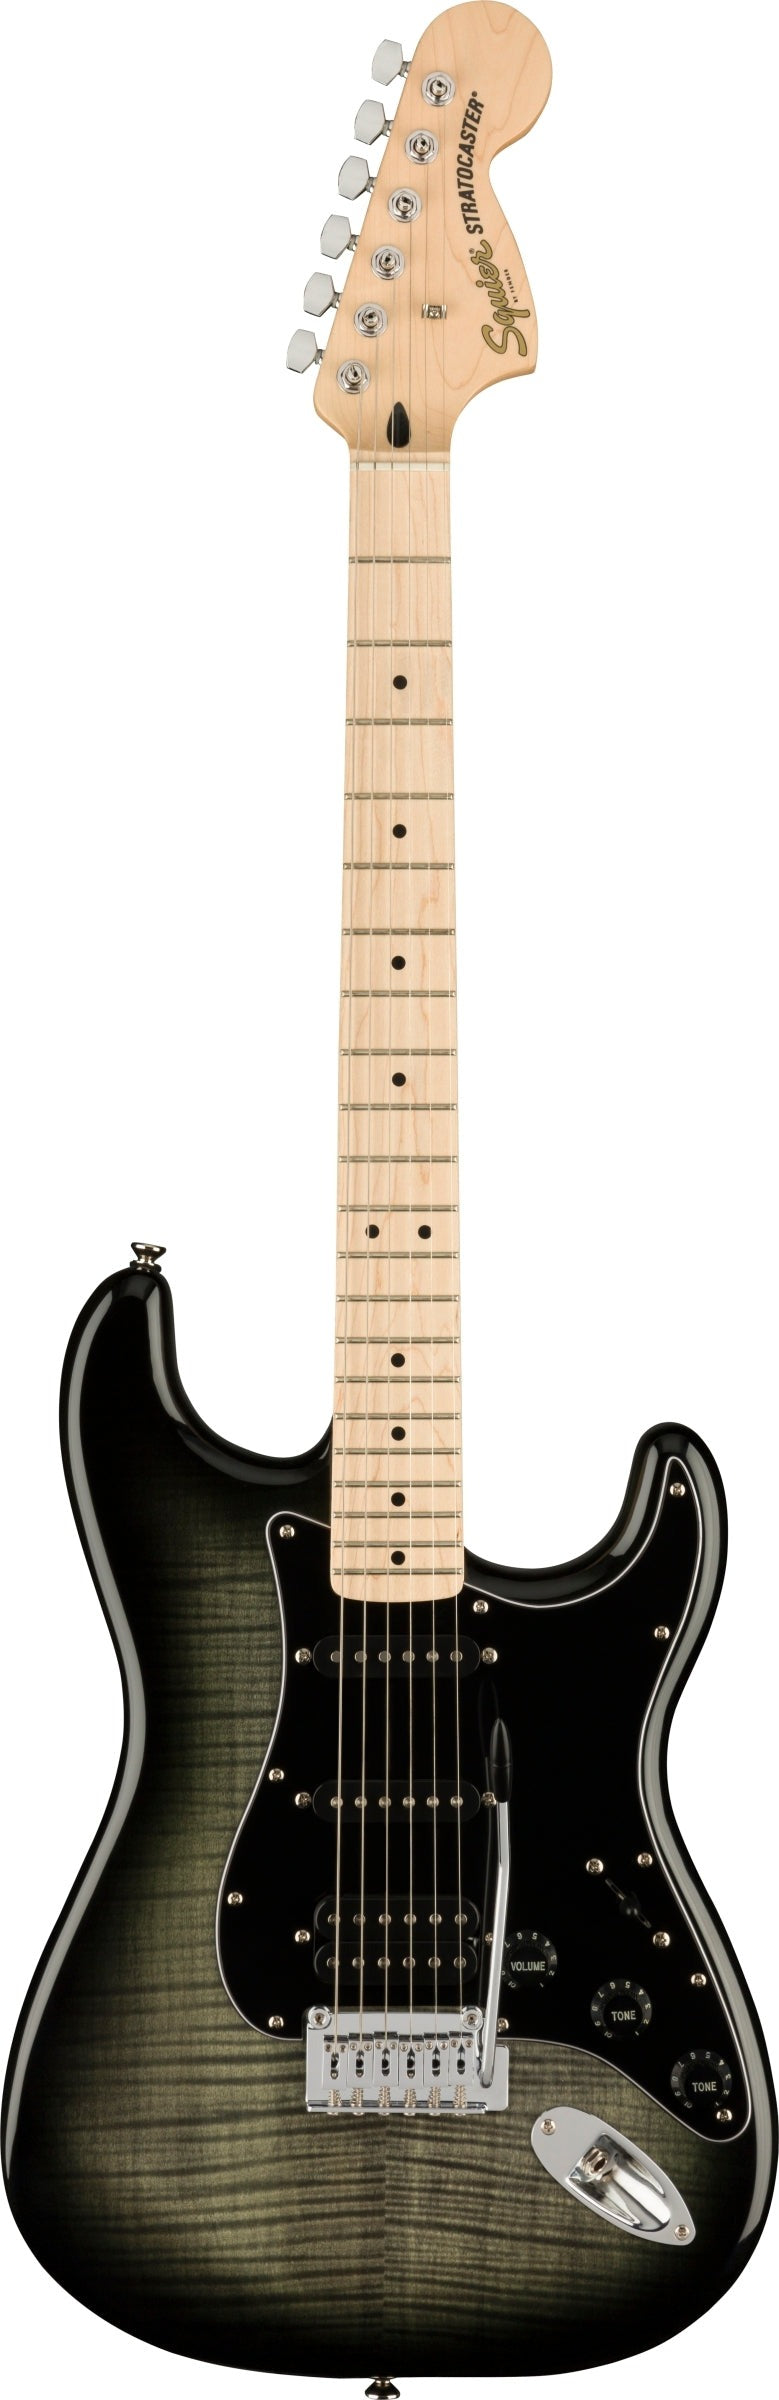 Squier Affinity Series Stratocaster Electric Guitar - Black Burst